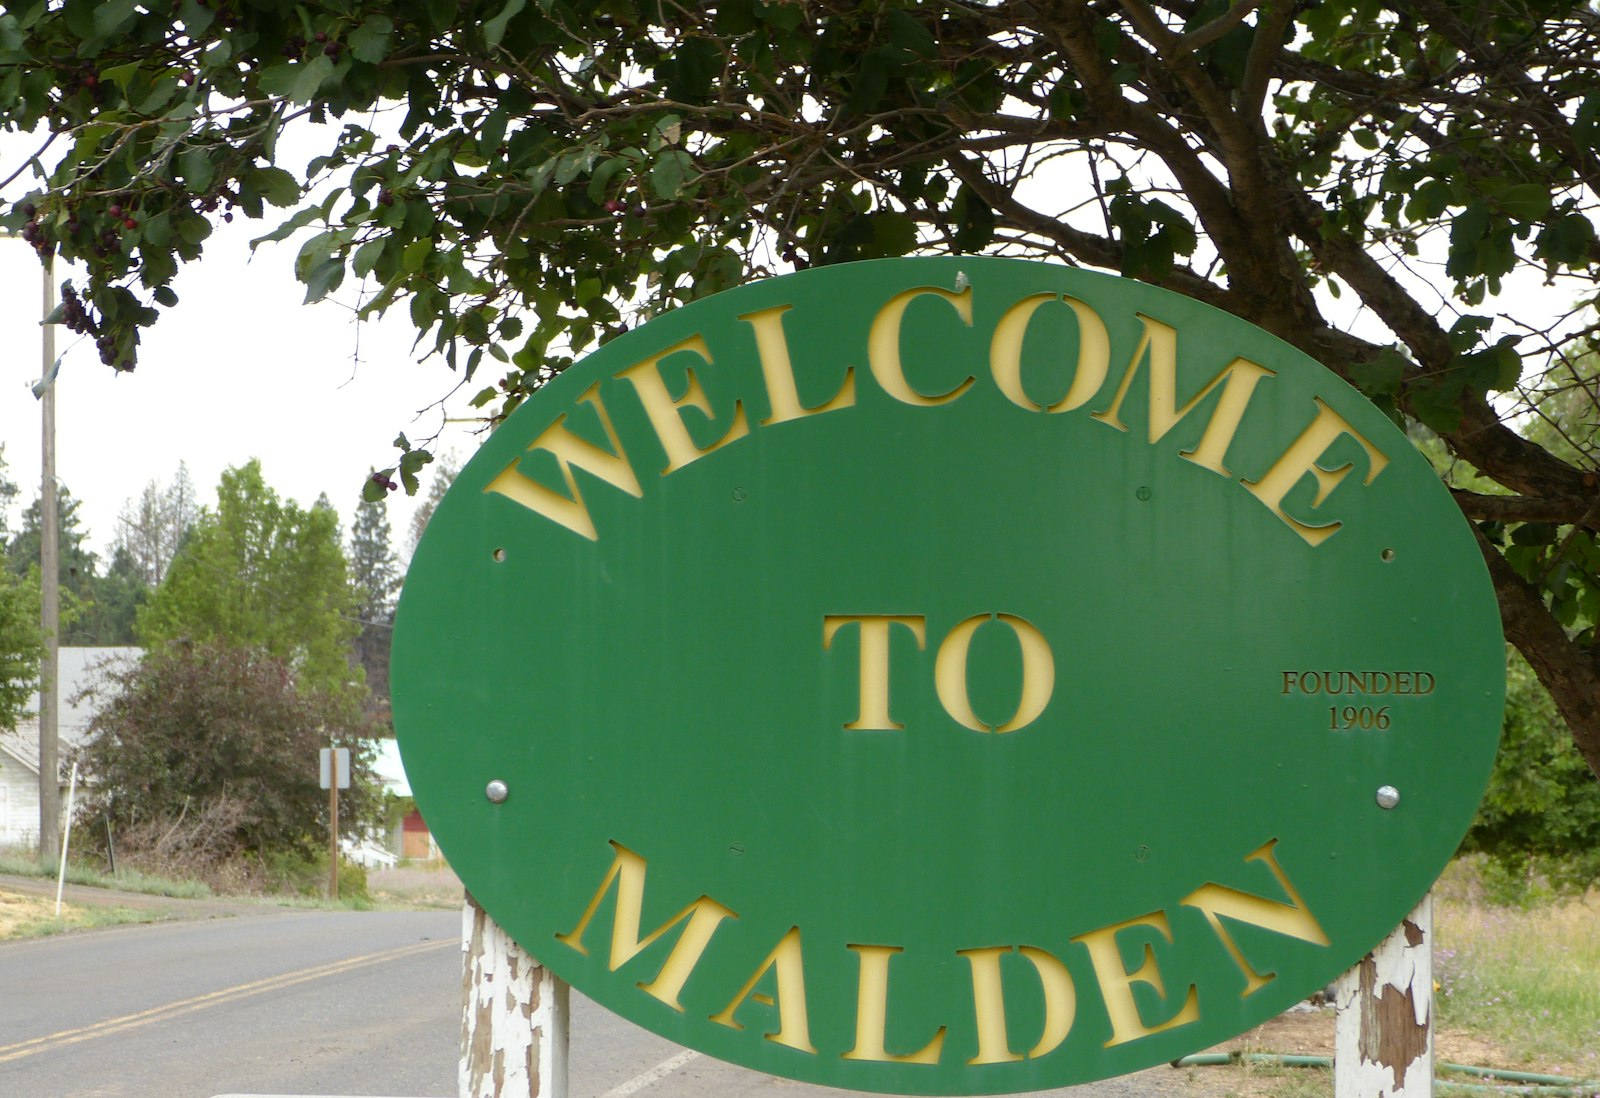 A welcome sign to Malden, WA. Founded in 1906.